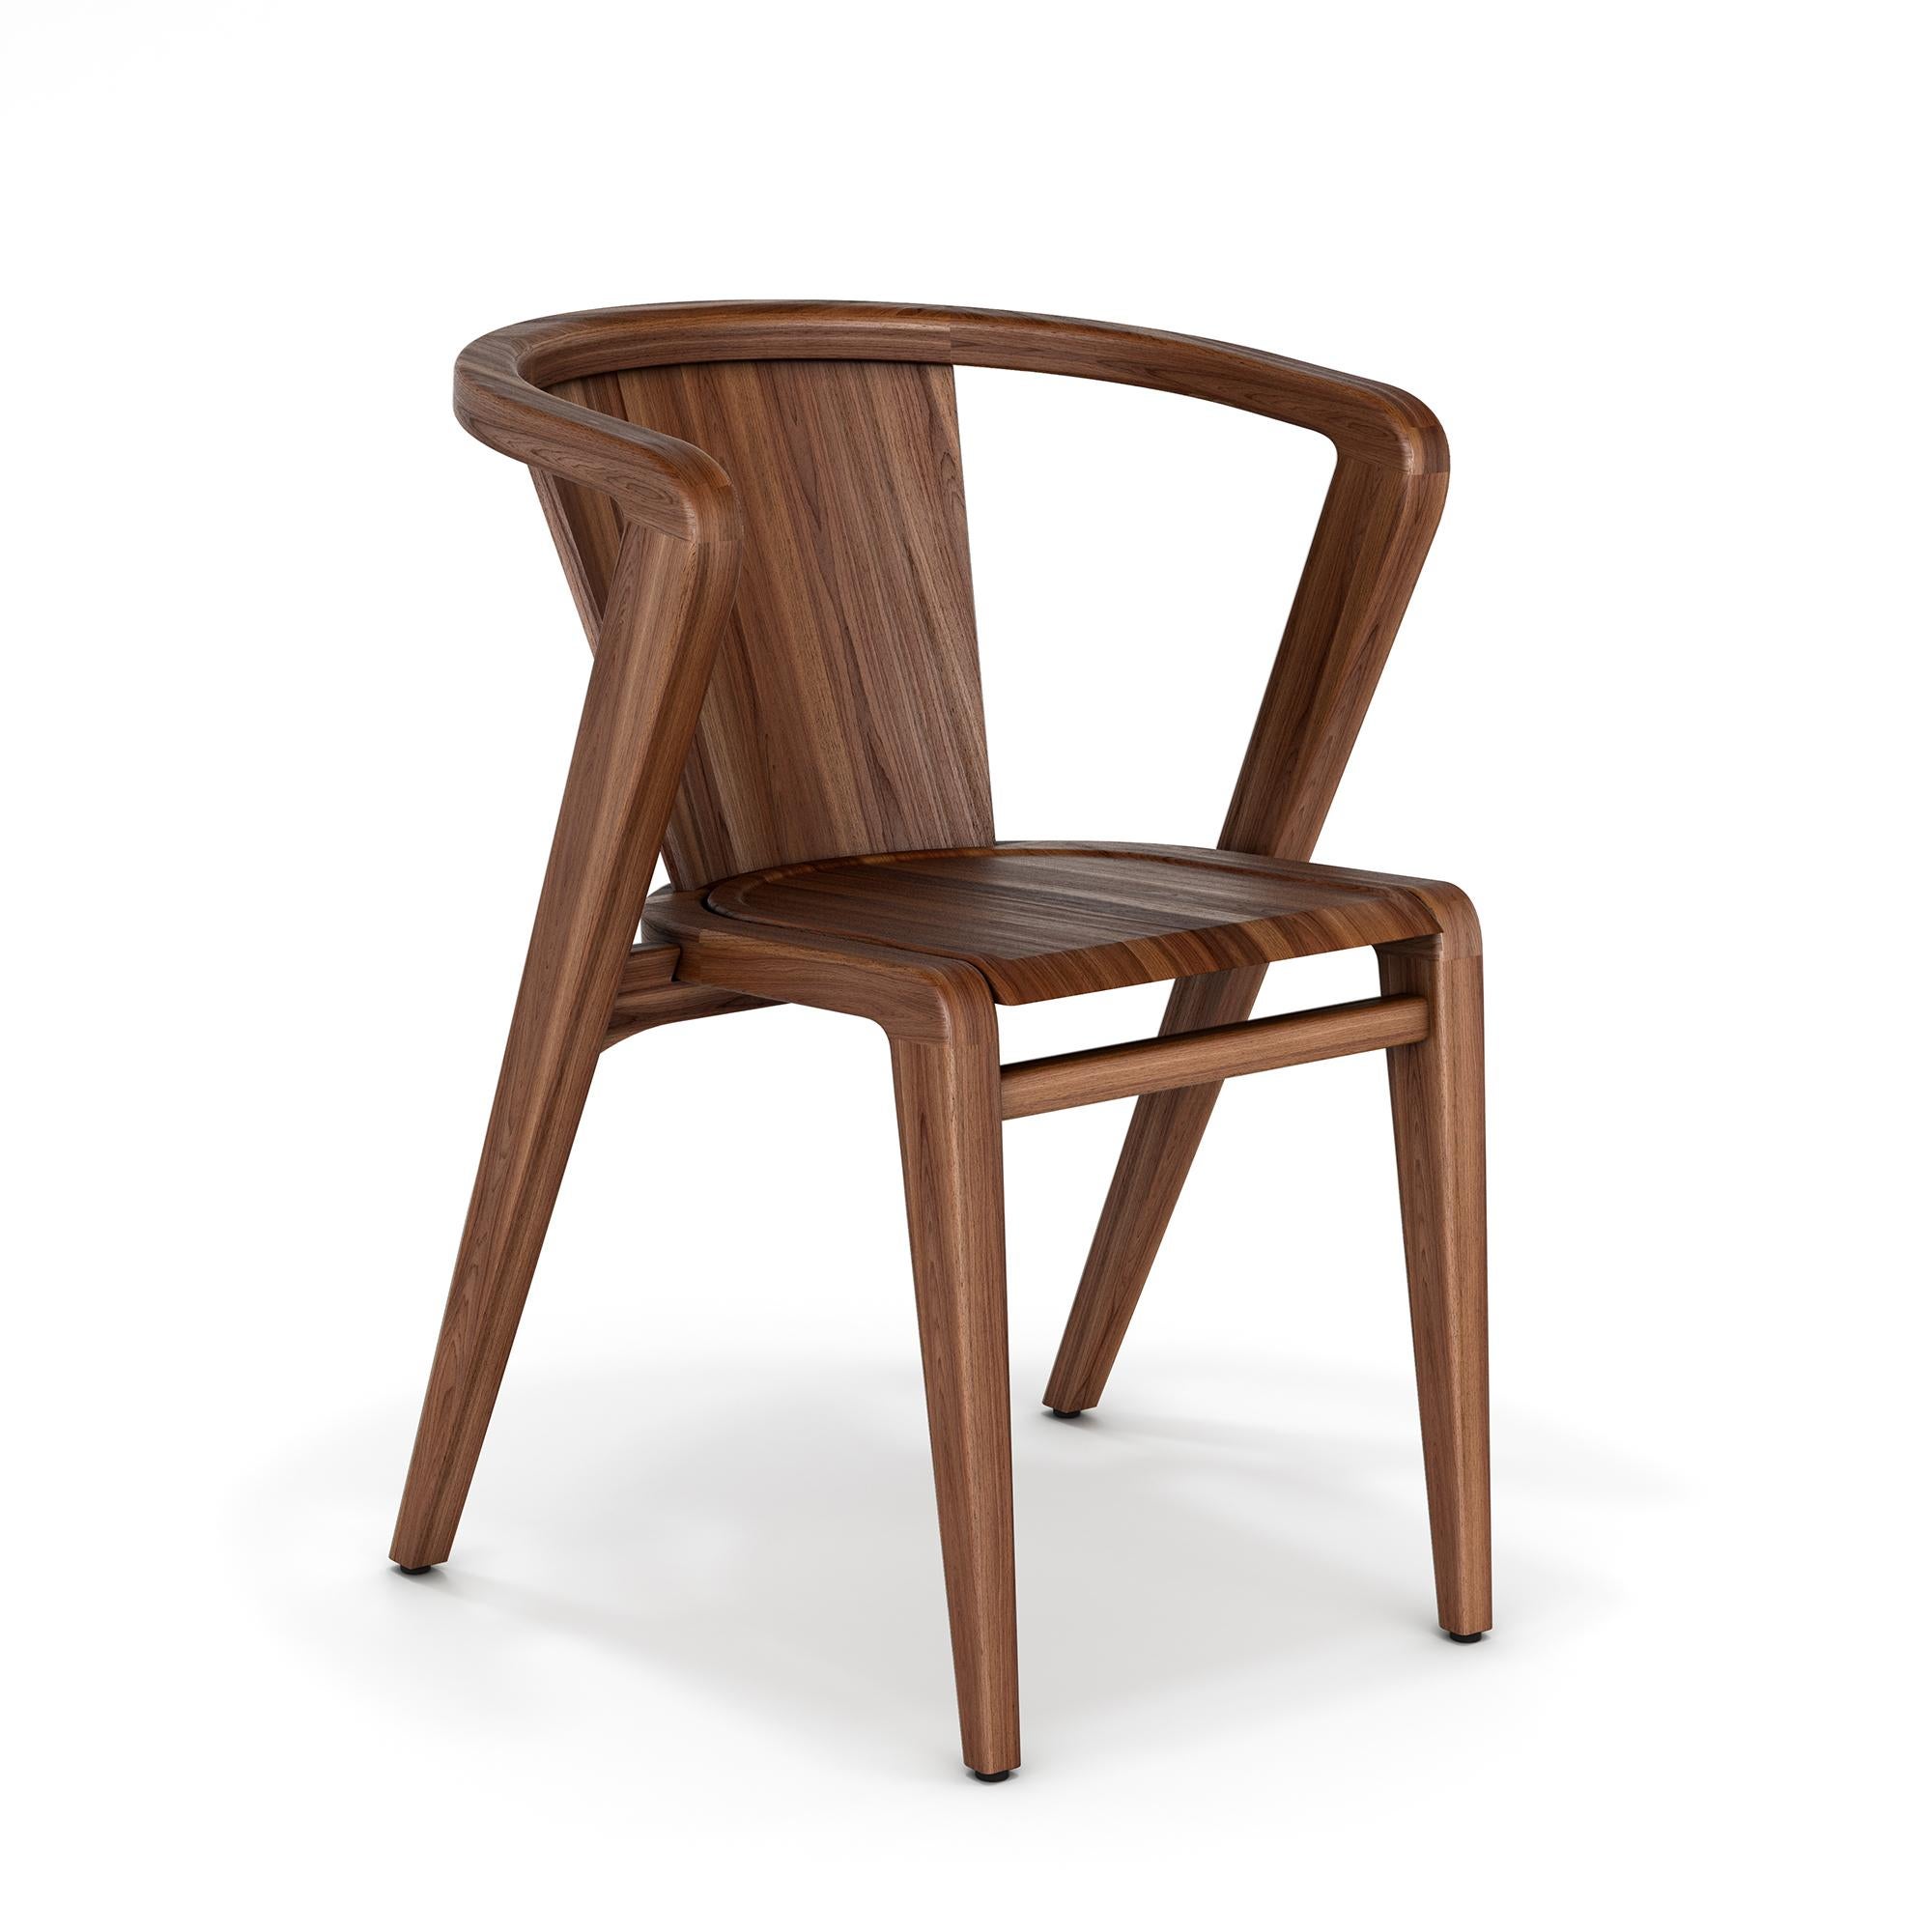 The Portuguese Roots chair designed by Alexandre Caldas, is a reinterpretation of a great icon of the emblematic outdoor chair in Portugal from the late 50s. It’s also an ambicious project of a team who believe in the cultural values and the